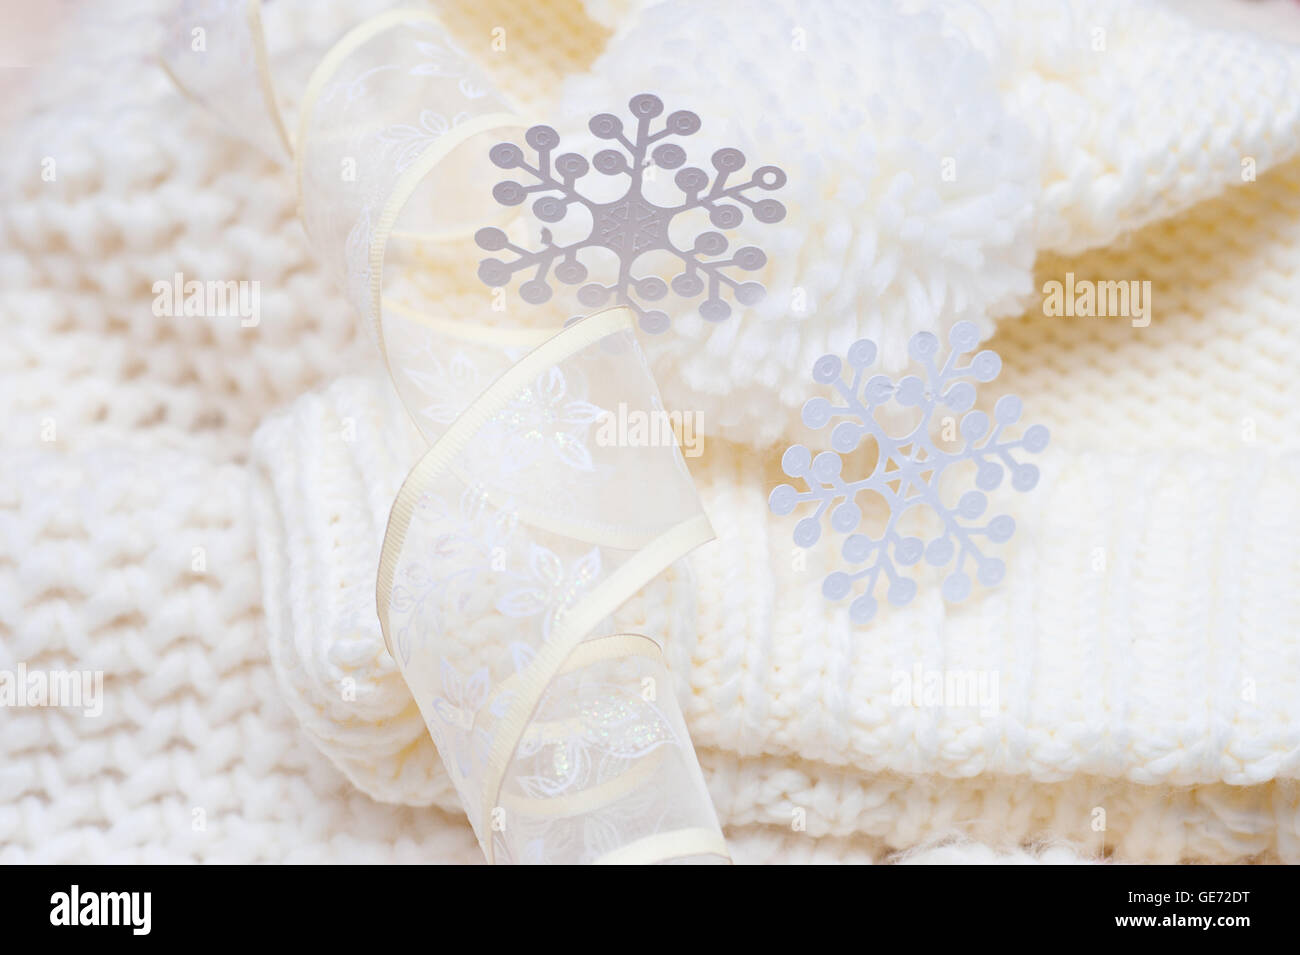 Warm woolen knitted hat and scarf with big white snowflakes Stock Photo